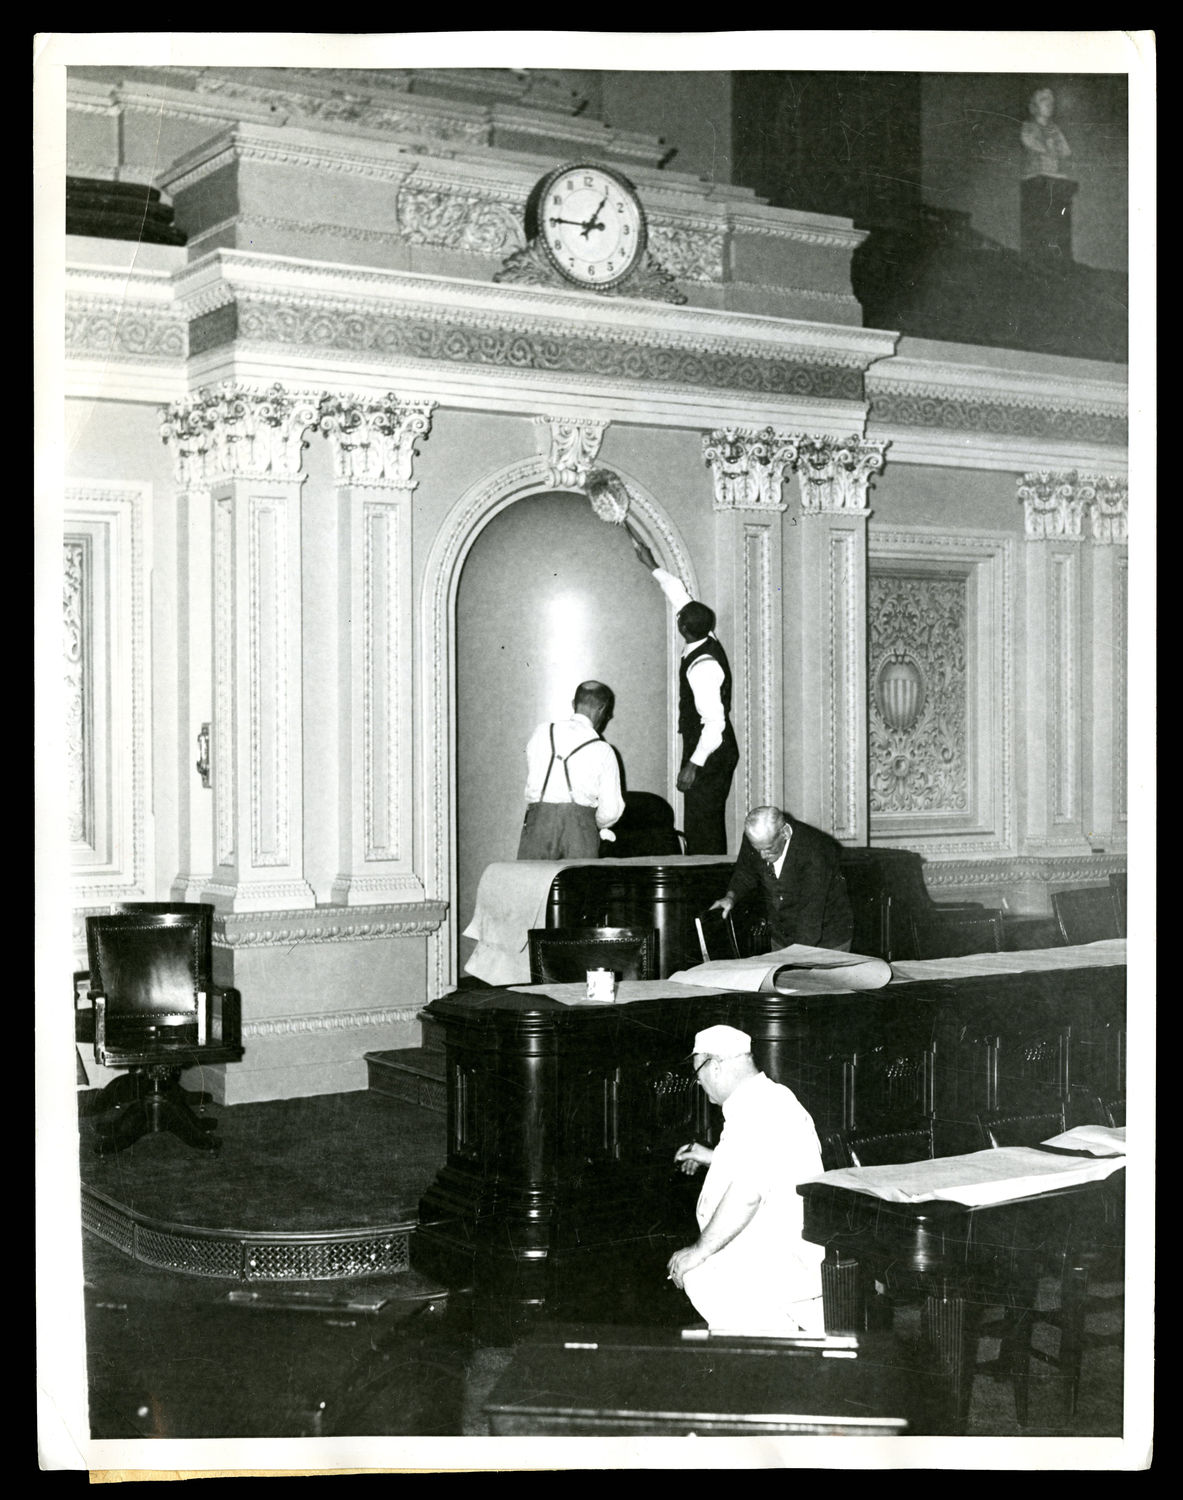 Readying Senate Chamber for Congress Opening (Acc. No. 38.01192.001)